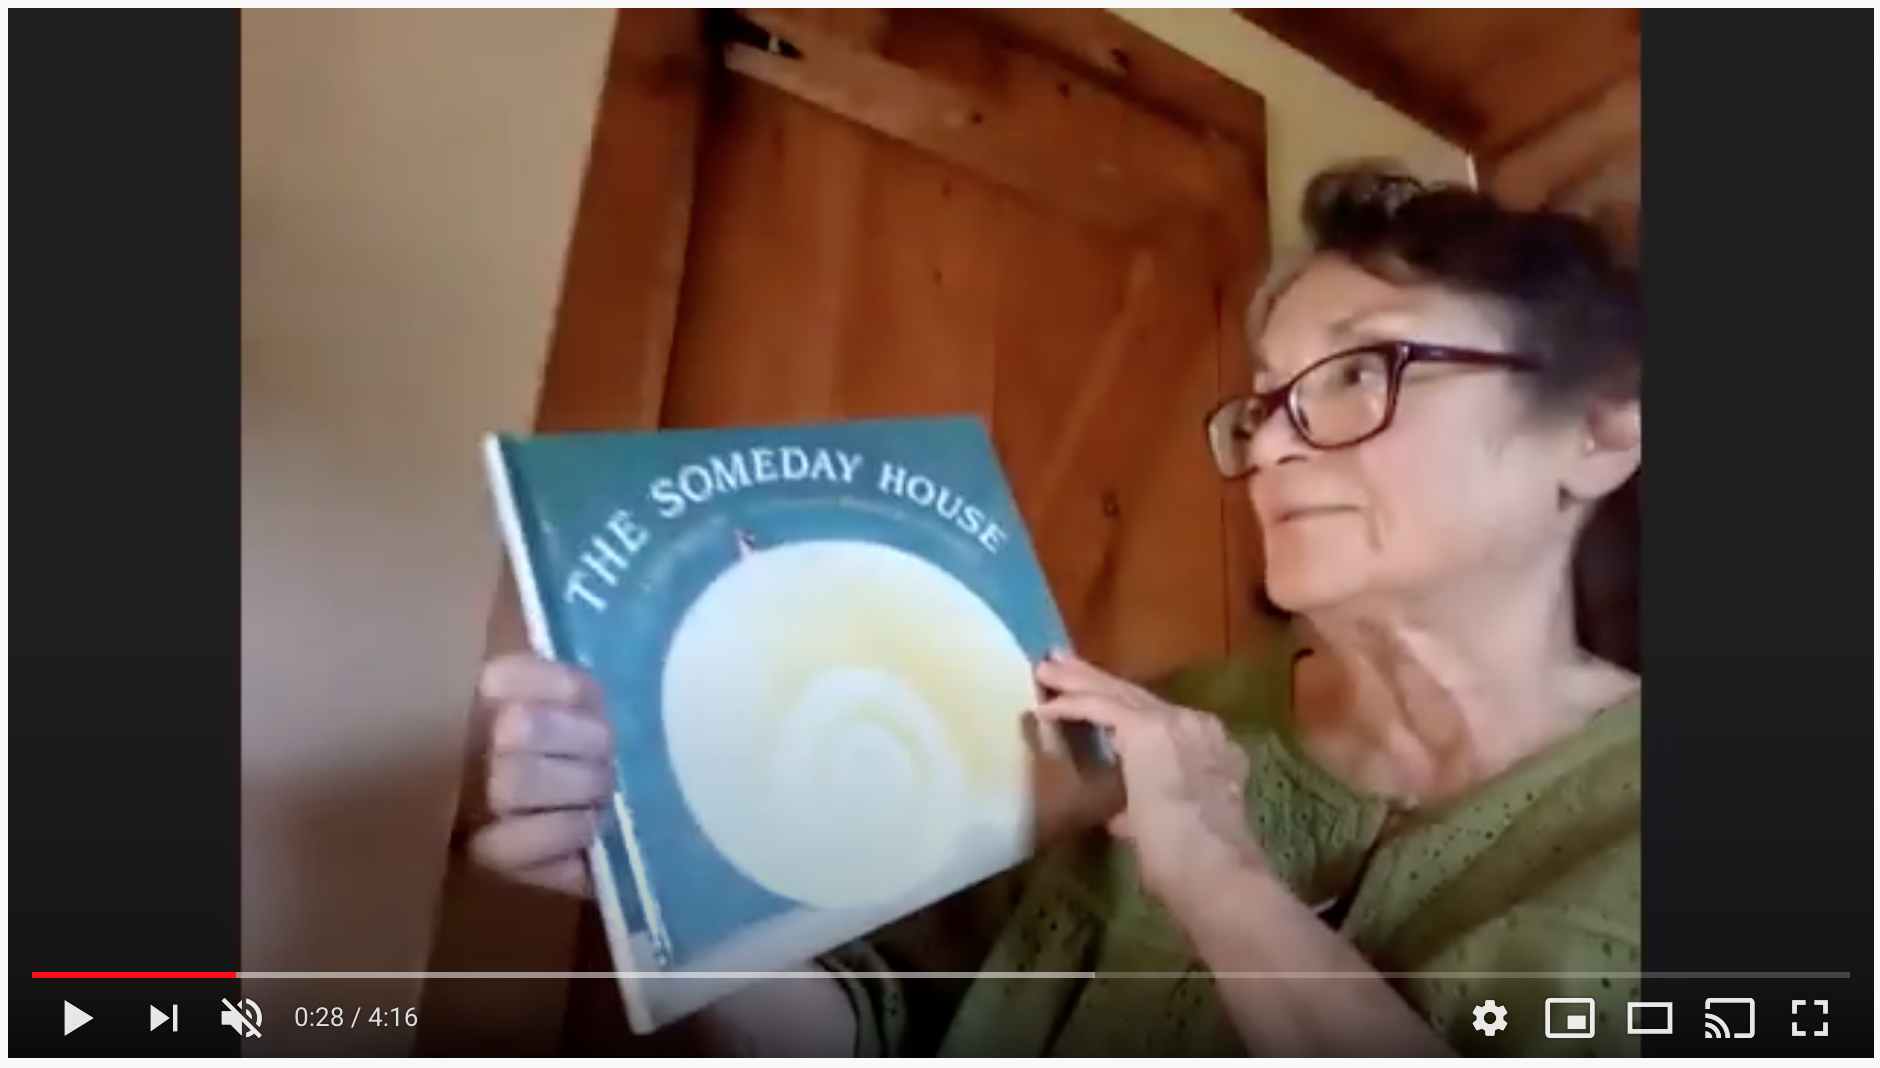 The Someday House Read Aloud